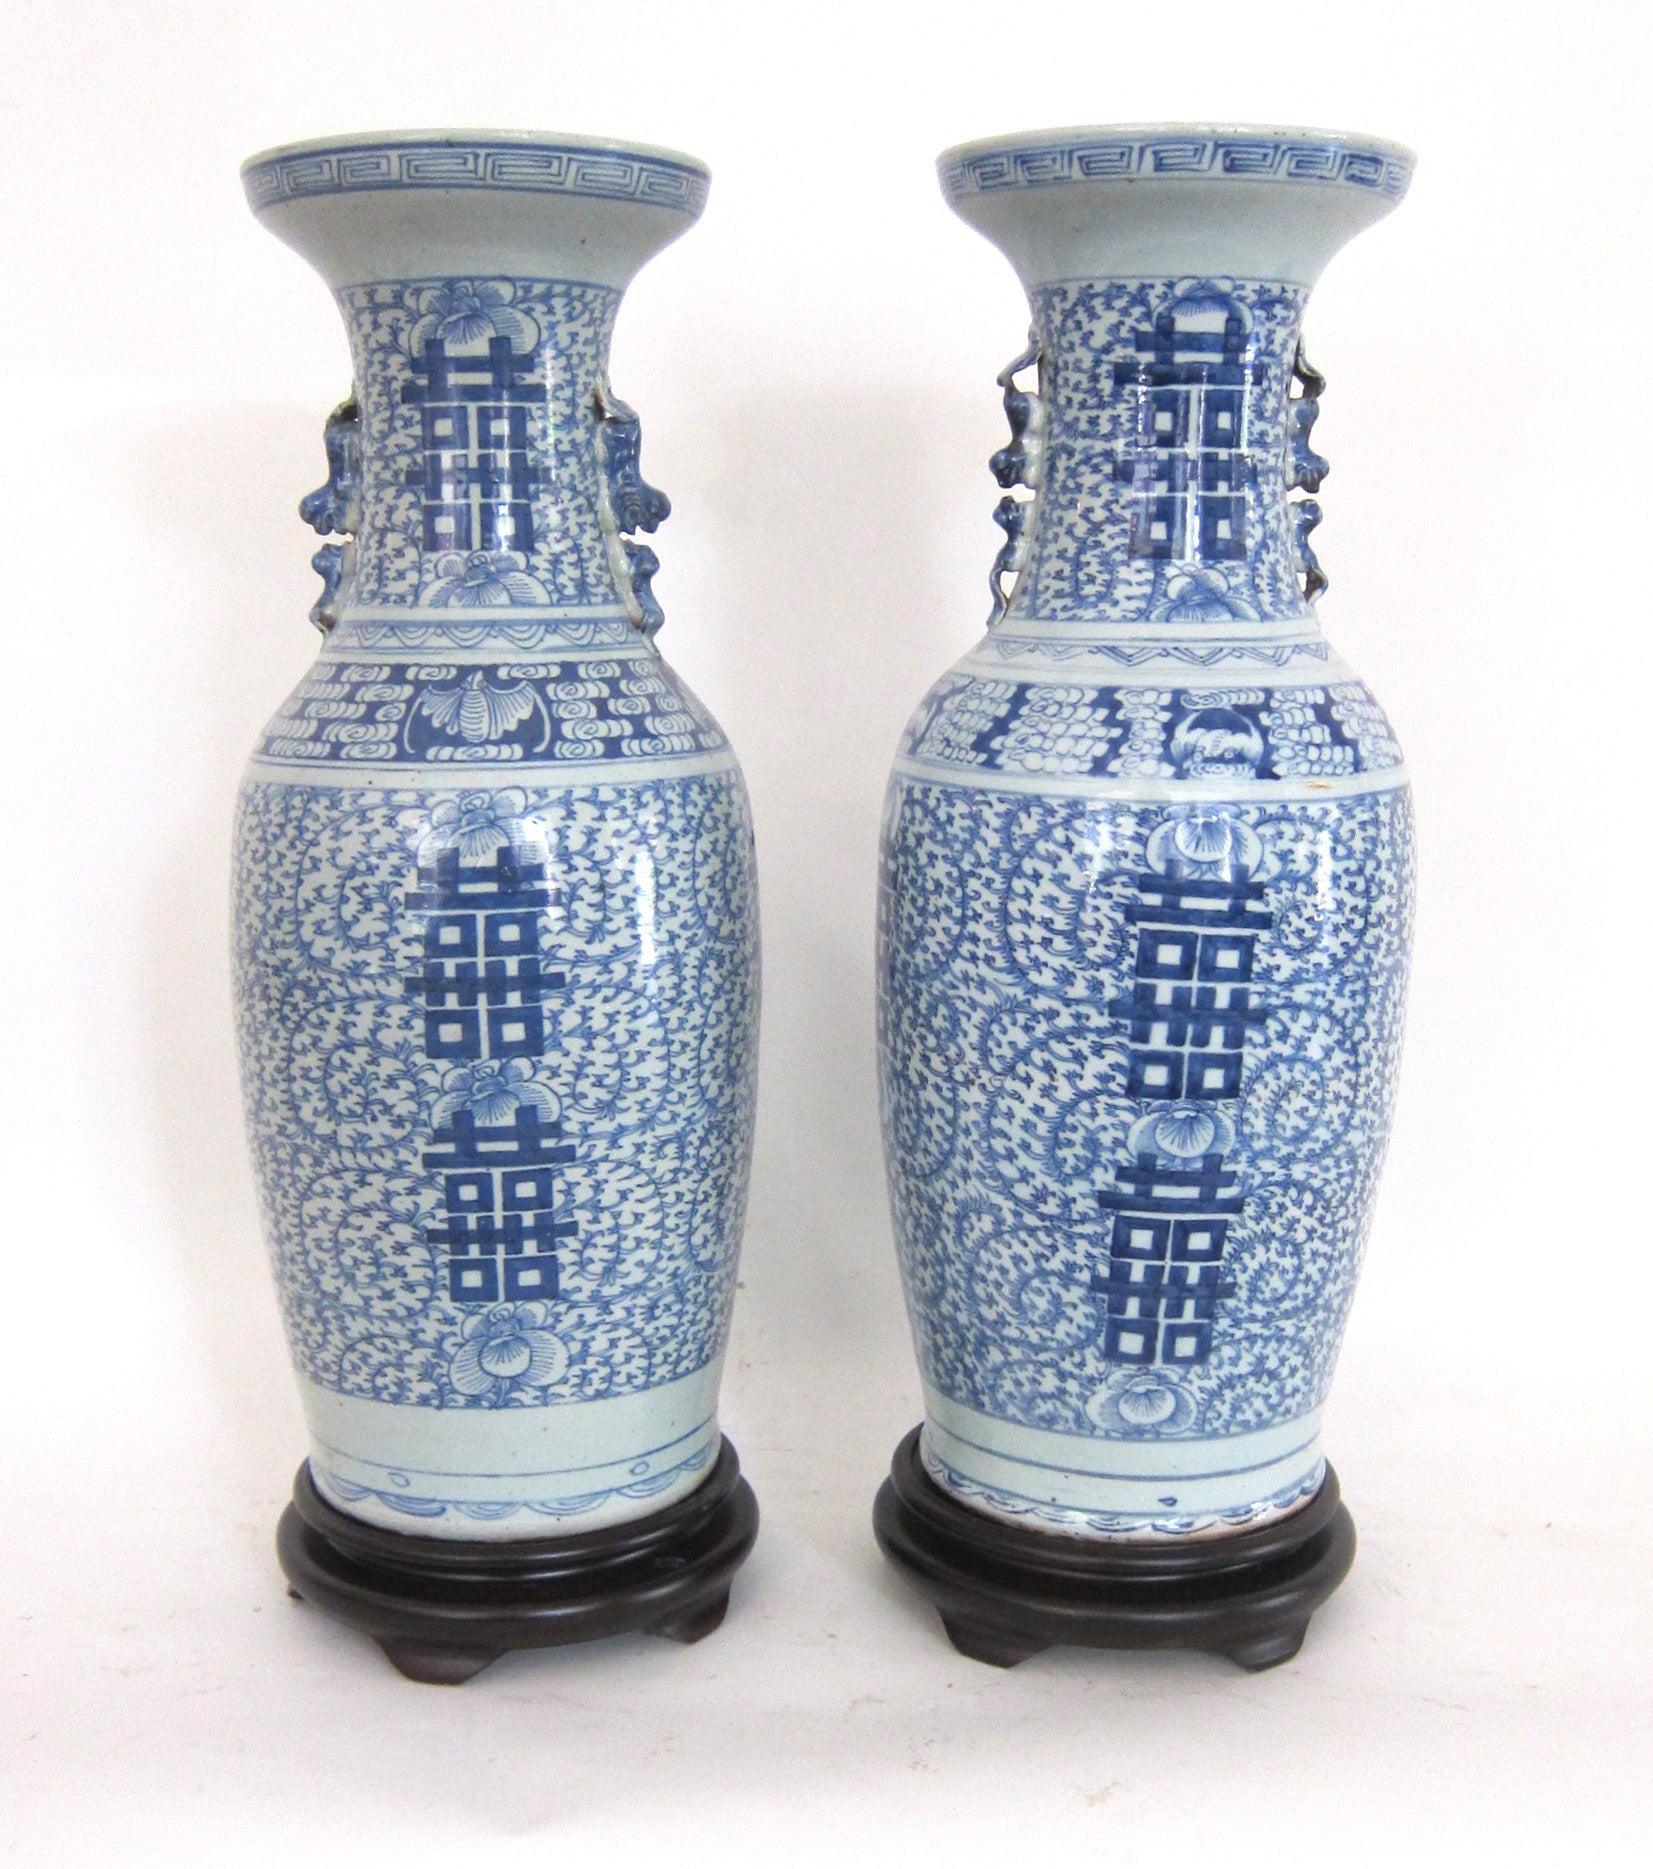 A Large Pair of Chinese Blue and White Vases with the Double Happiness Symbol